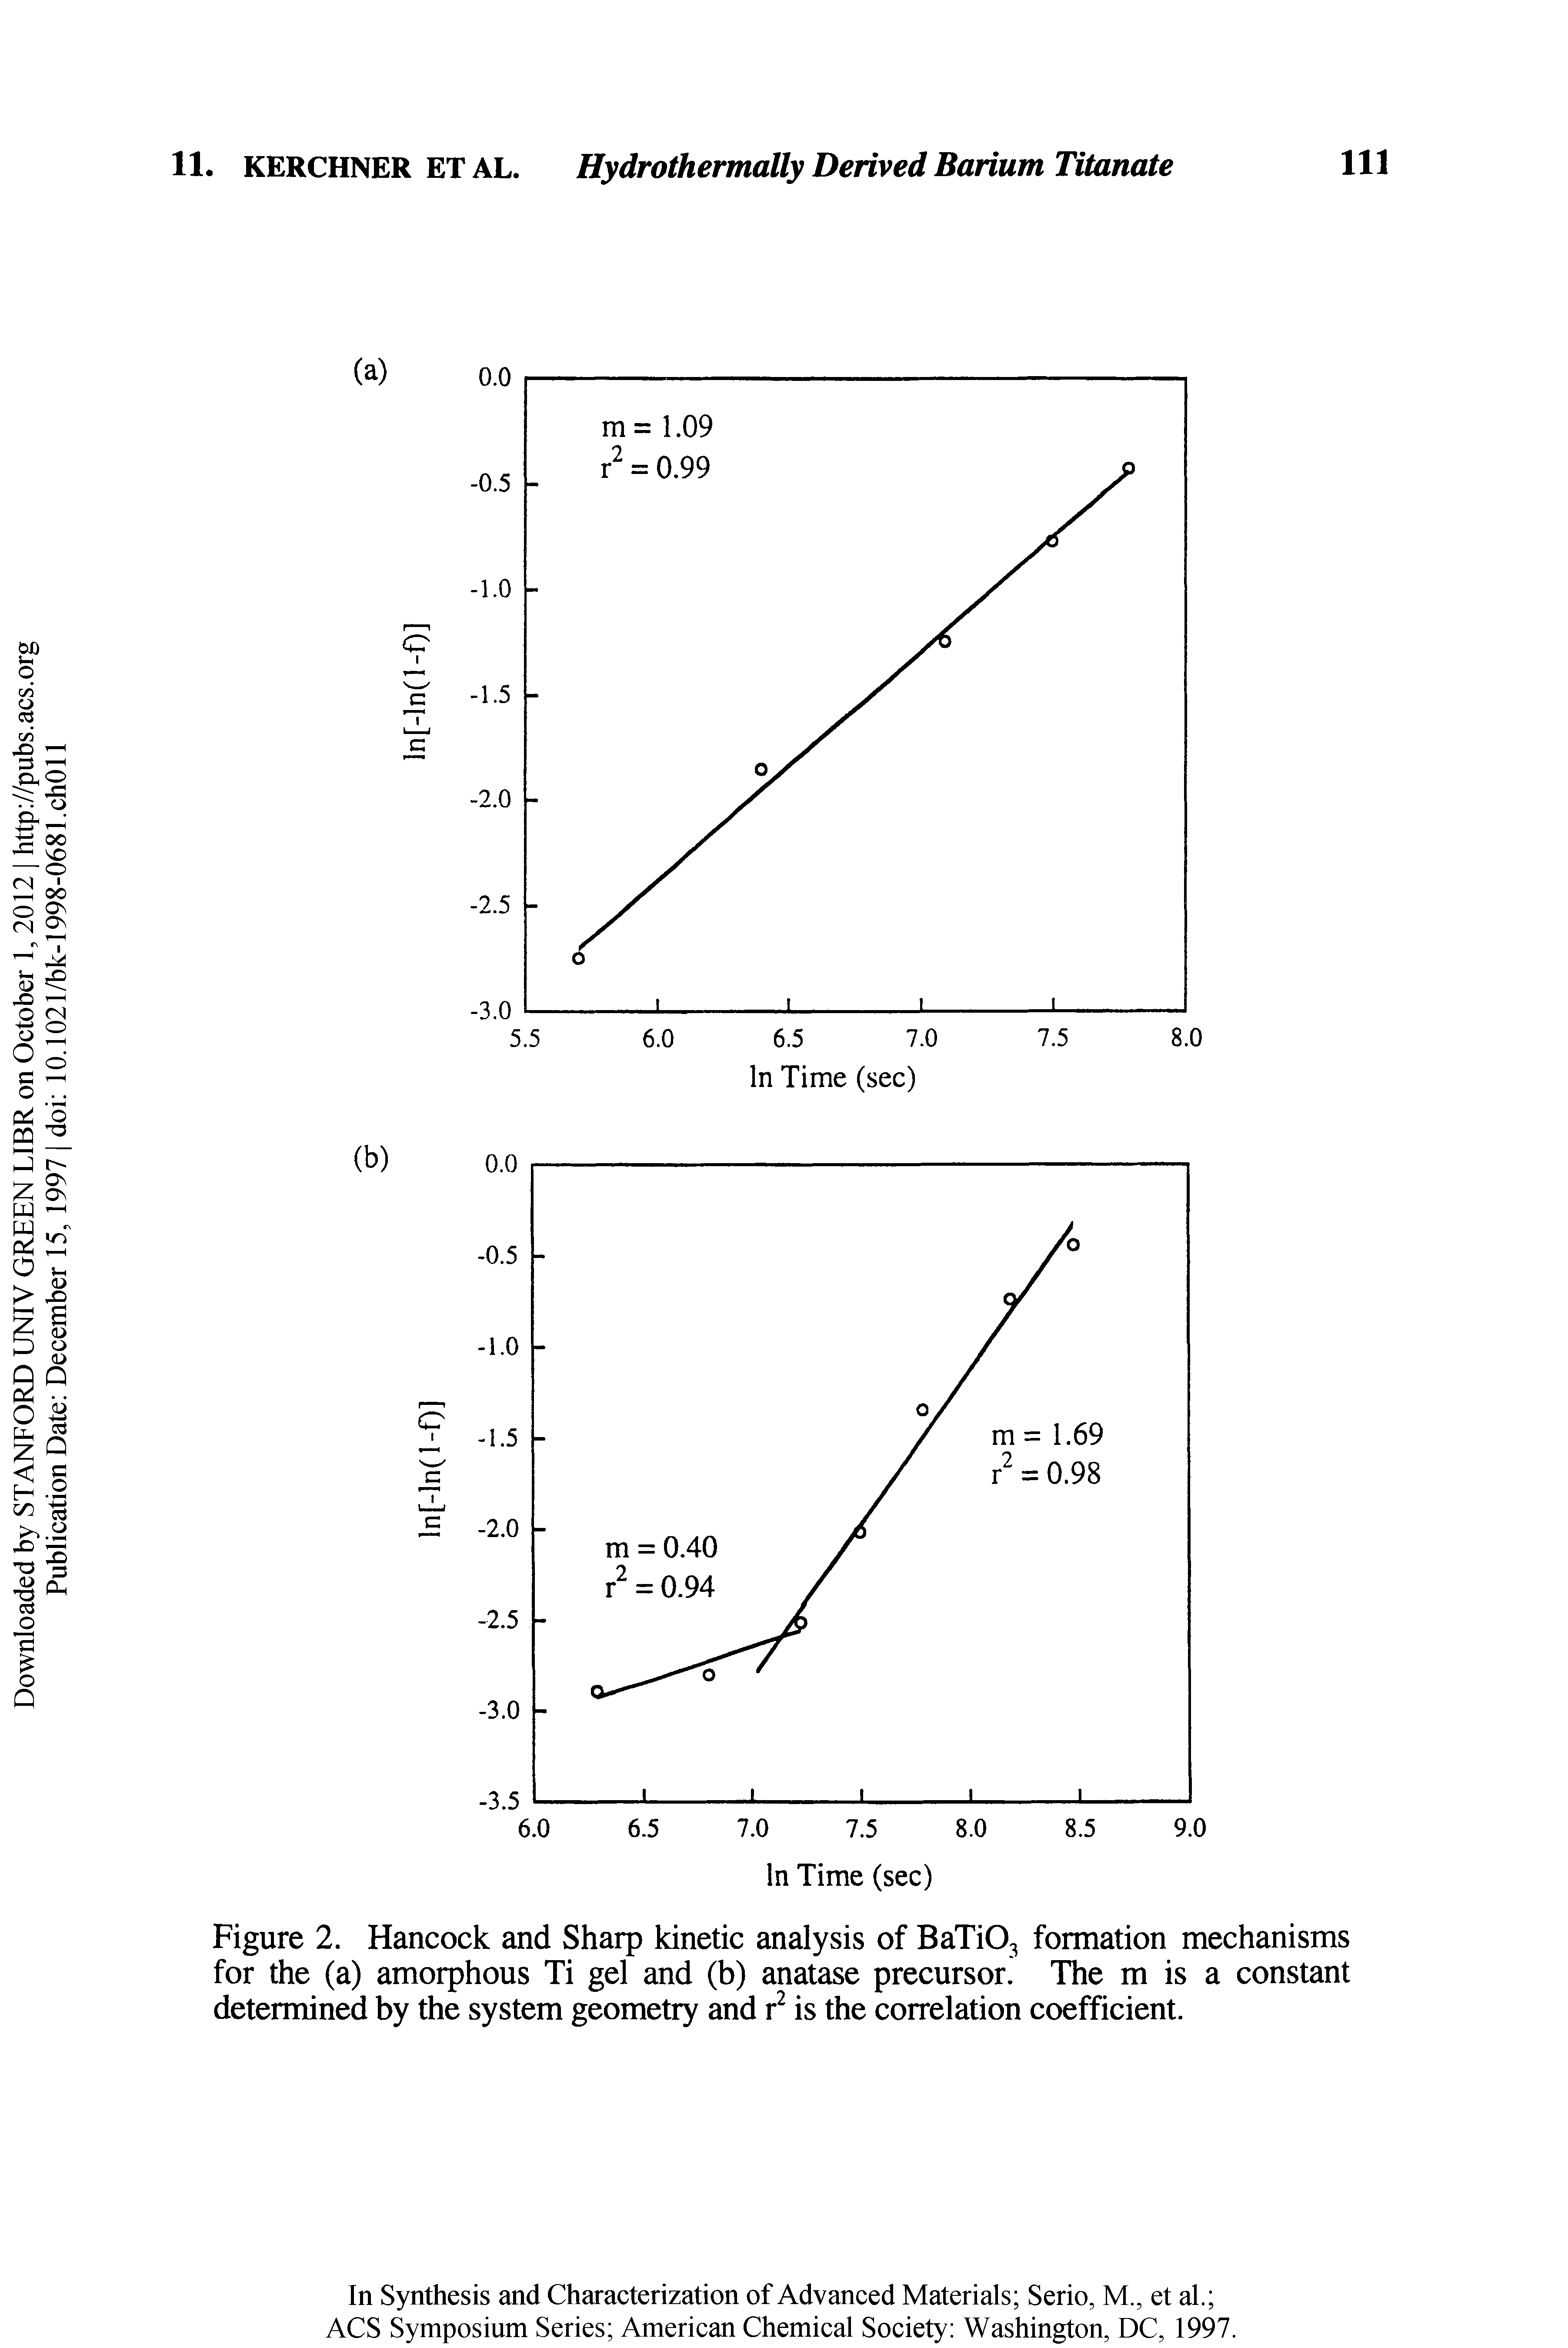 Figure 2. Hancock and Sharp kinetic analysis of BaTiO formation mechanisms for the (a) amorphous Ti gel and (b) anatase precursor. The m is a constant determined by the system geometry and r is the correlation coefficient.